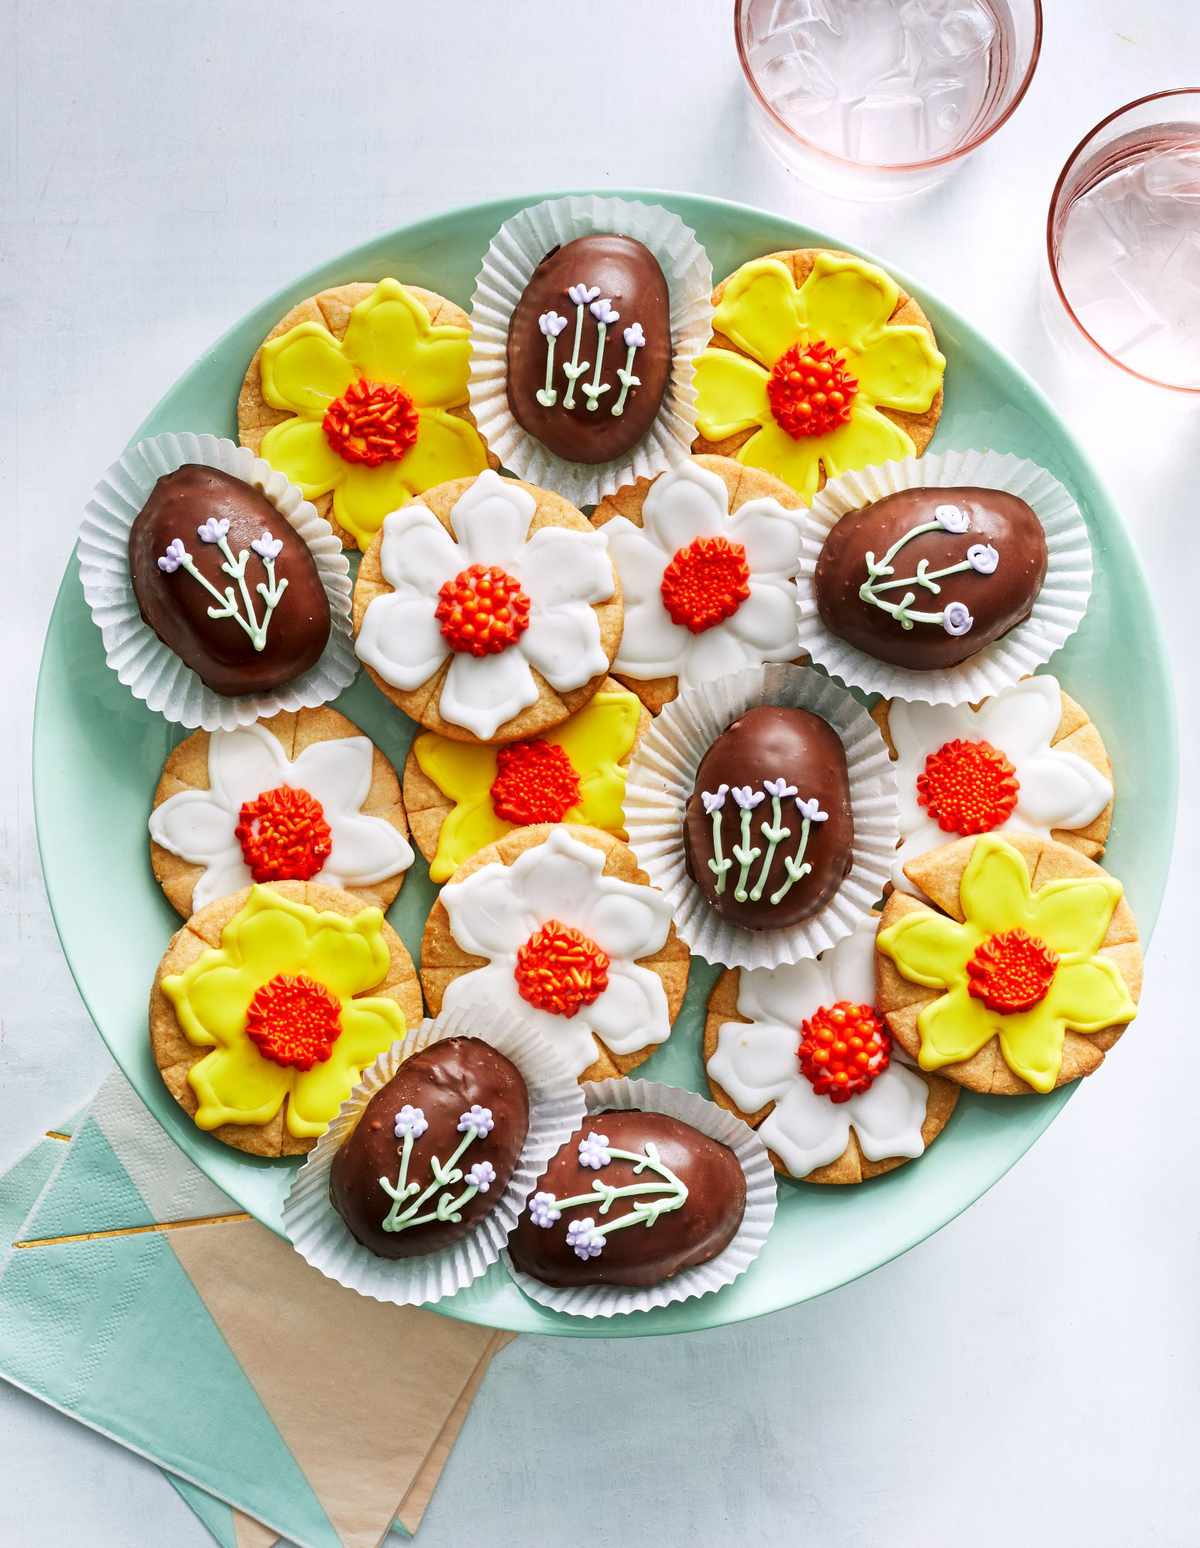 Chocolate-Peanut Butter Eggs and Daffodil Cookies